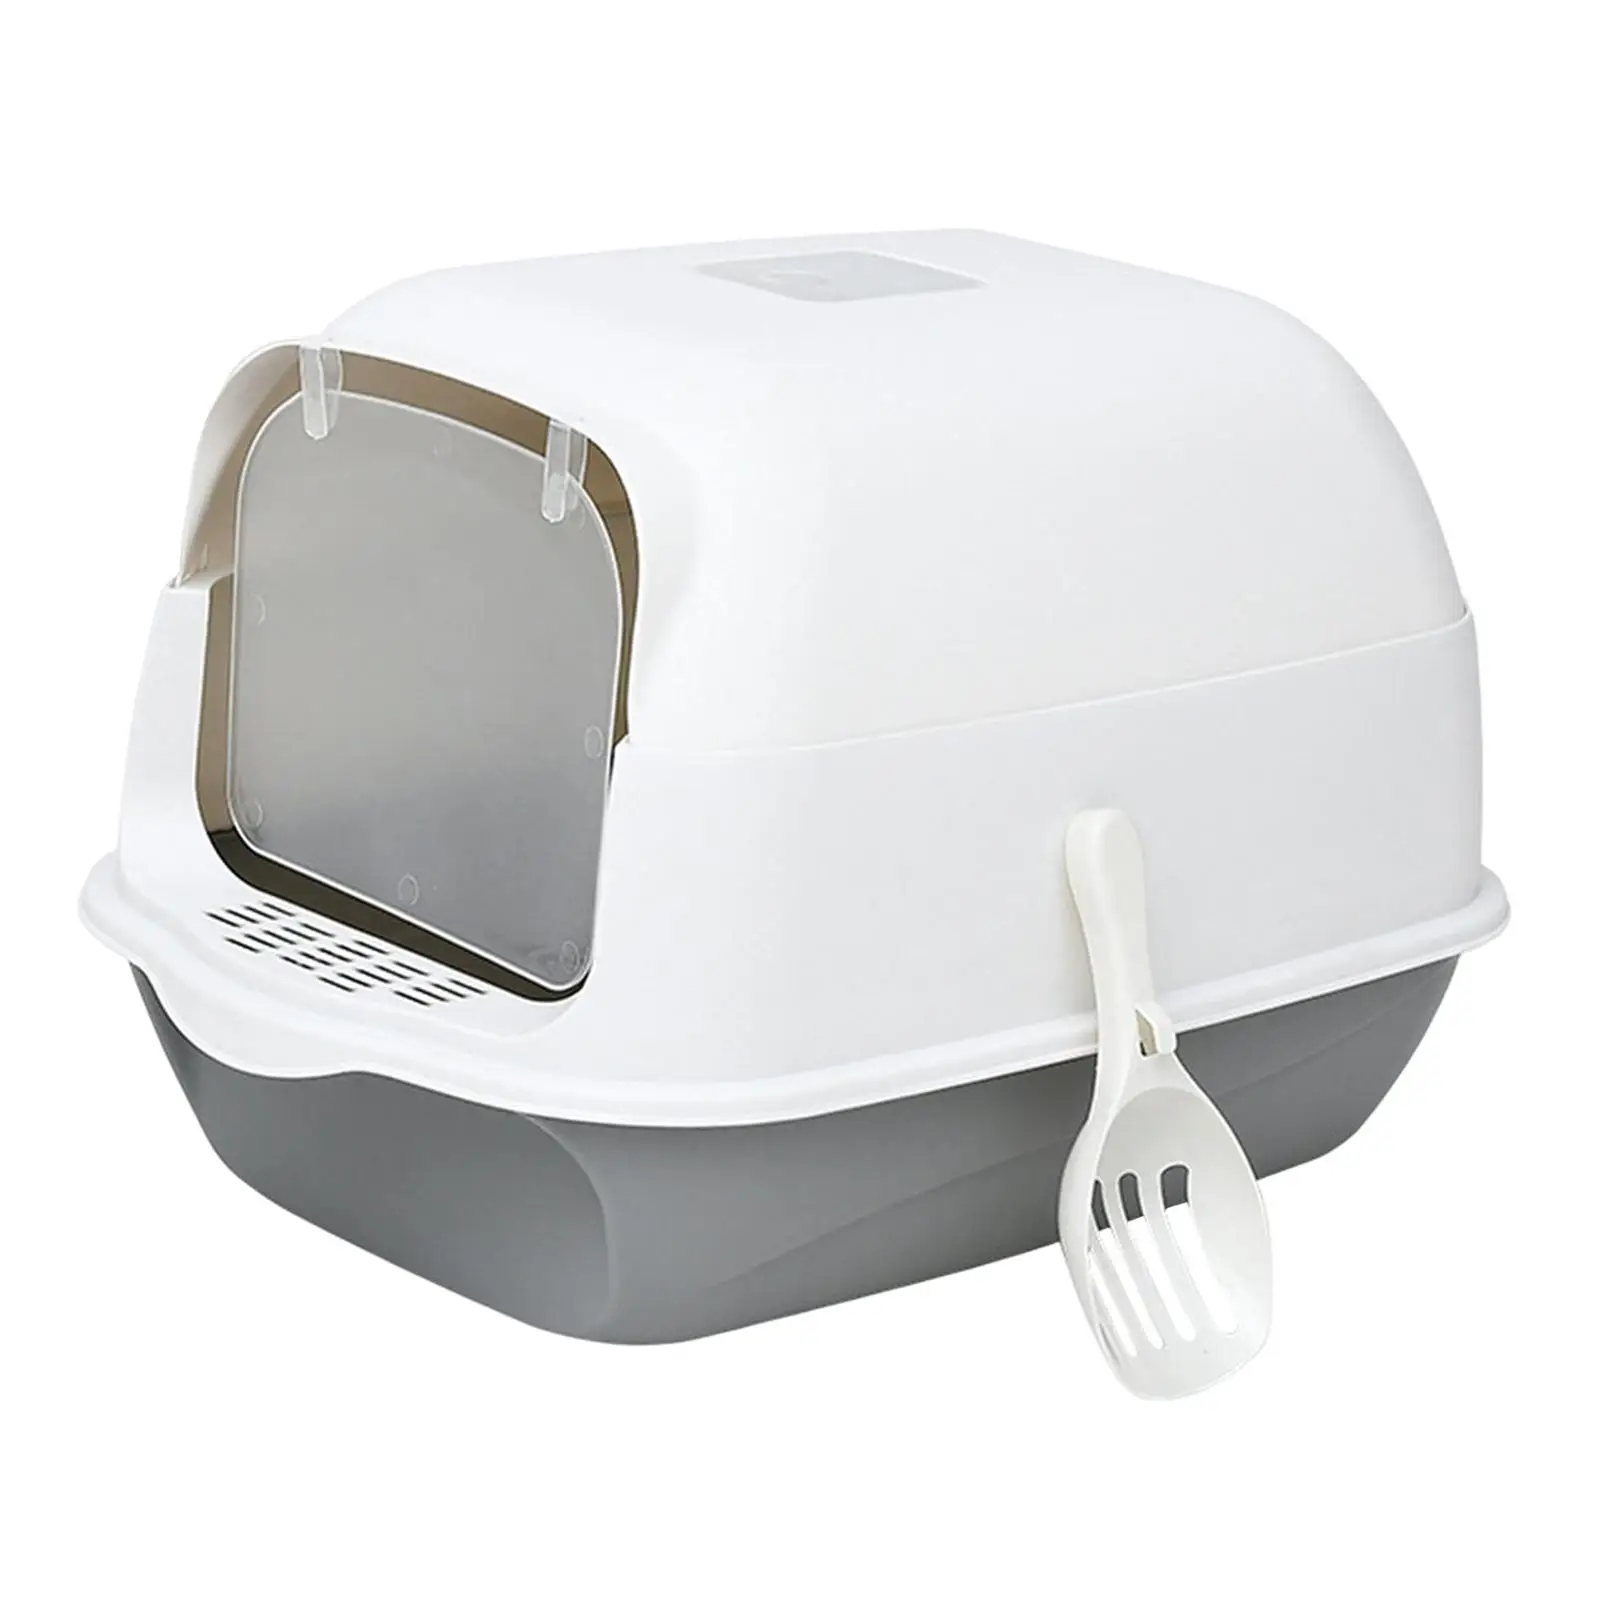 Cat Litter Box Fully Enclosed Kitten House Cat Potty Size 50x35x34cm Large space Supplies Anti Splash Durable with Scoop